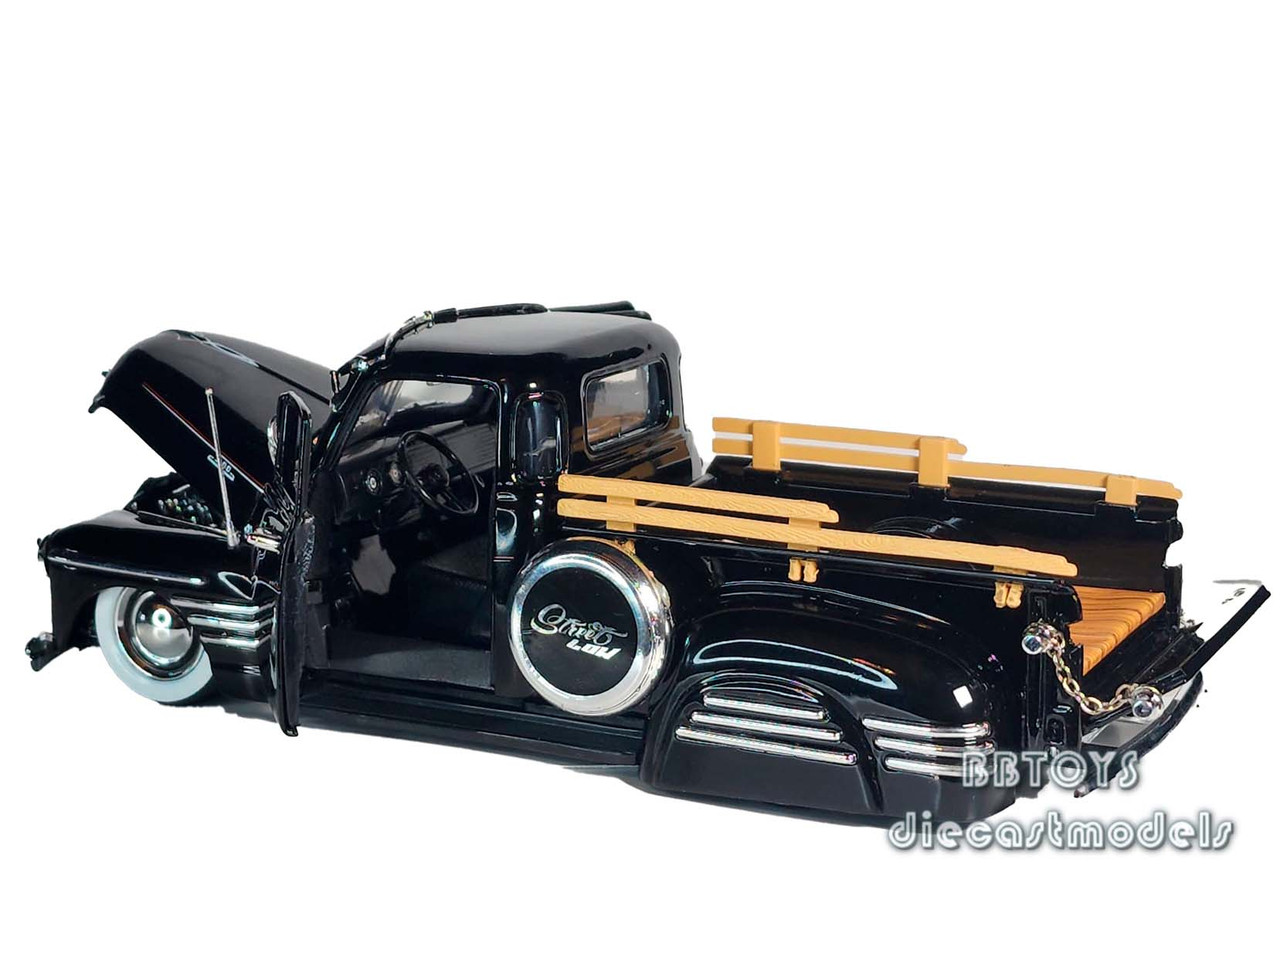 1951 Chevrolet Pickup Lowrider Black Street Low Limited Edition 1 